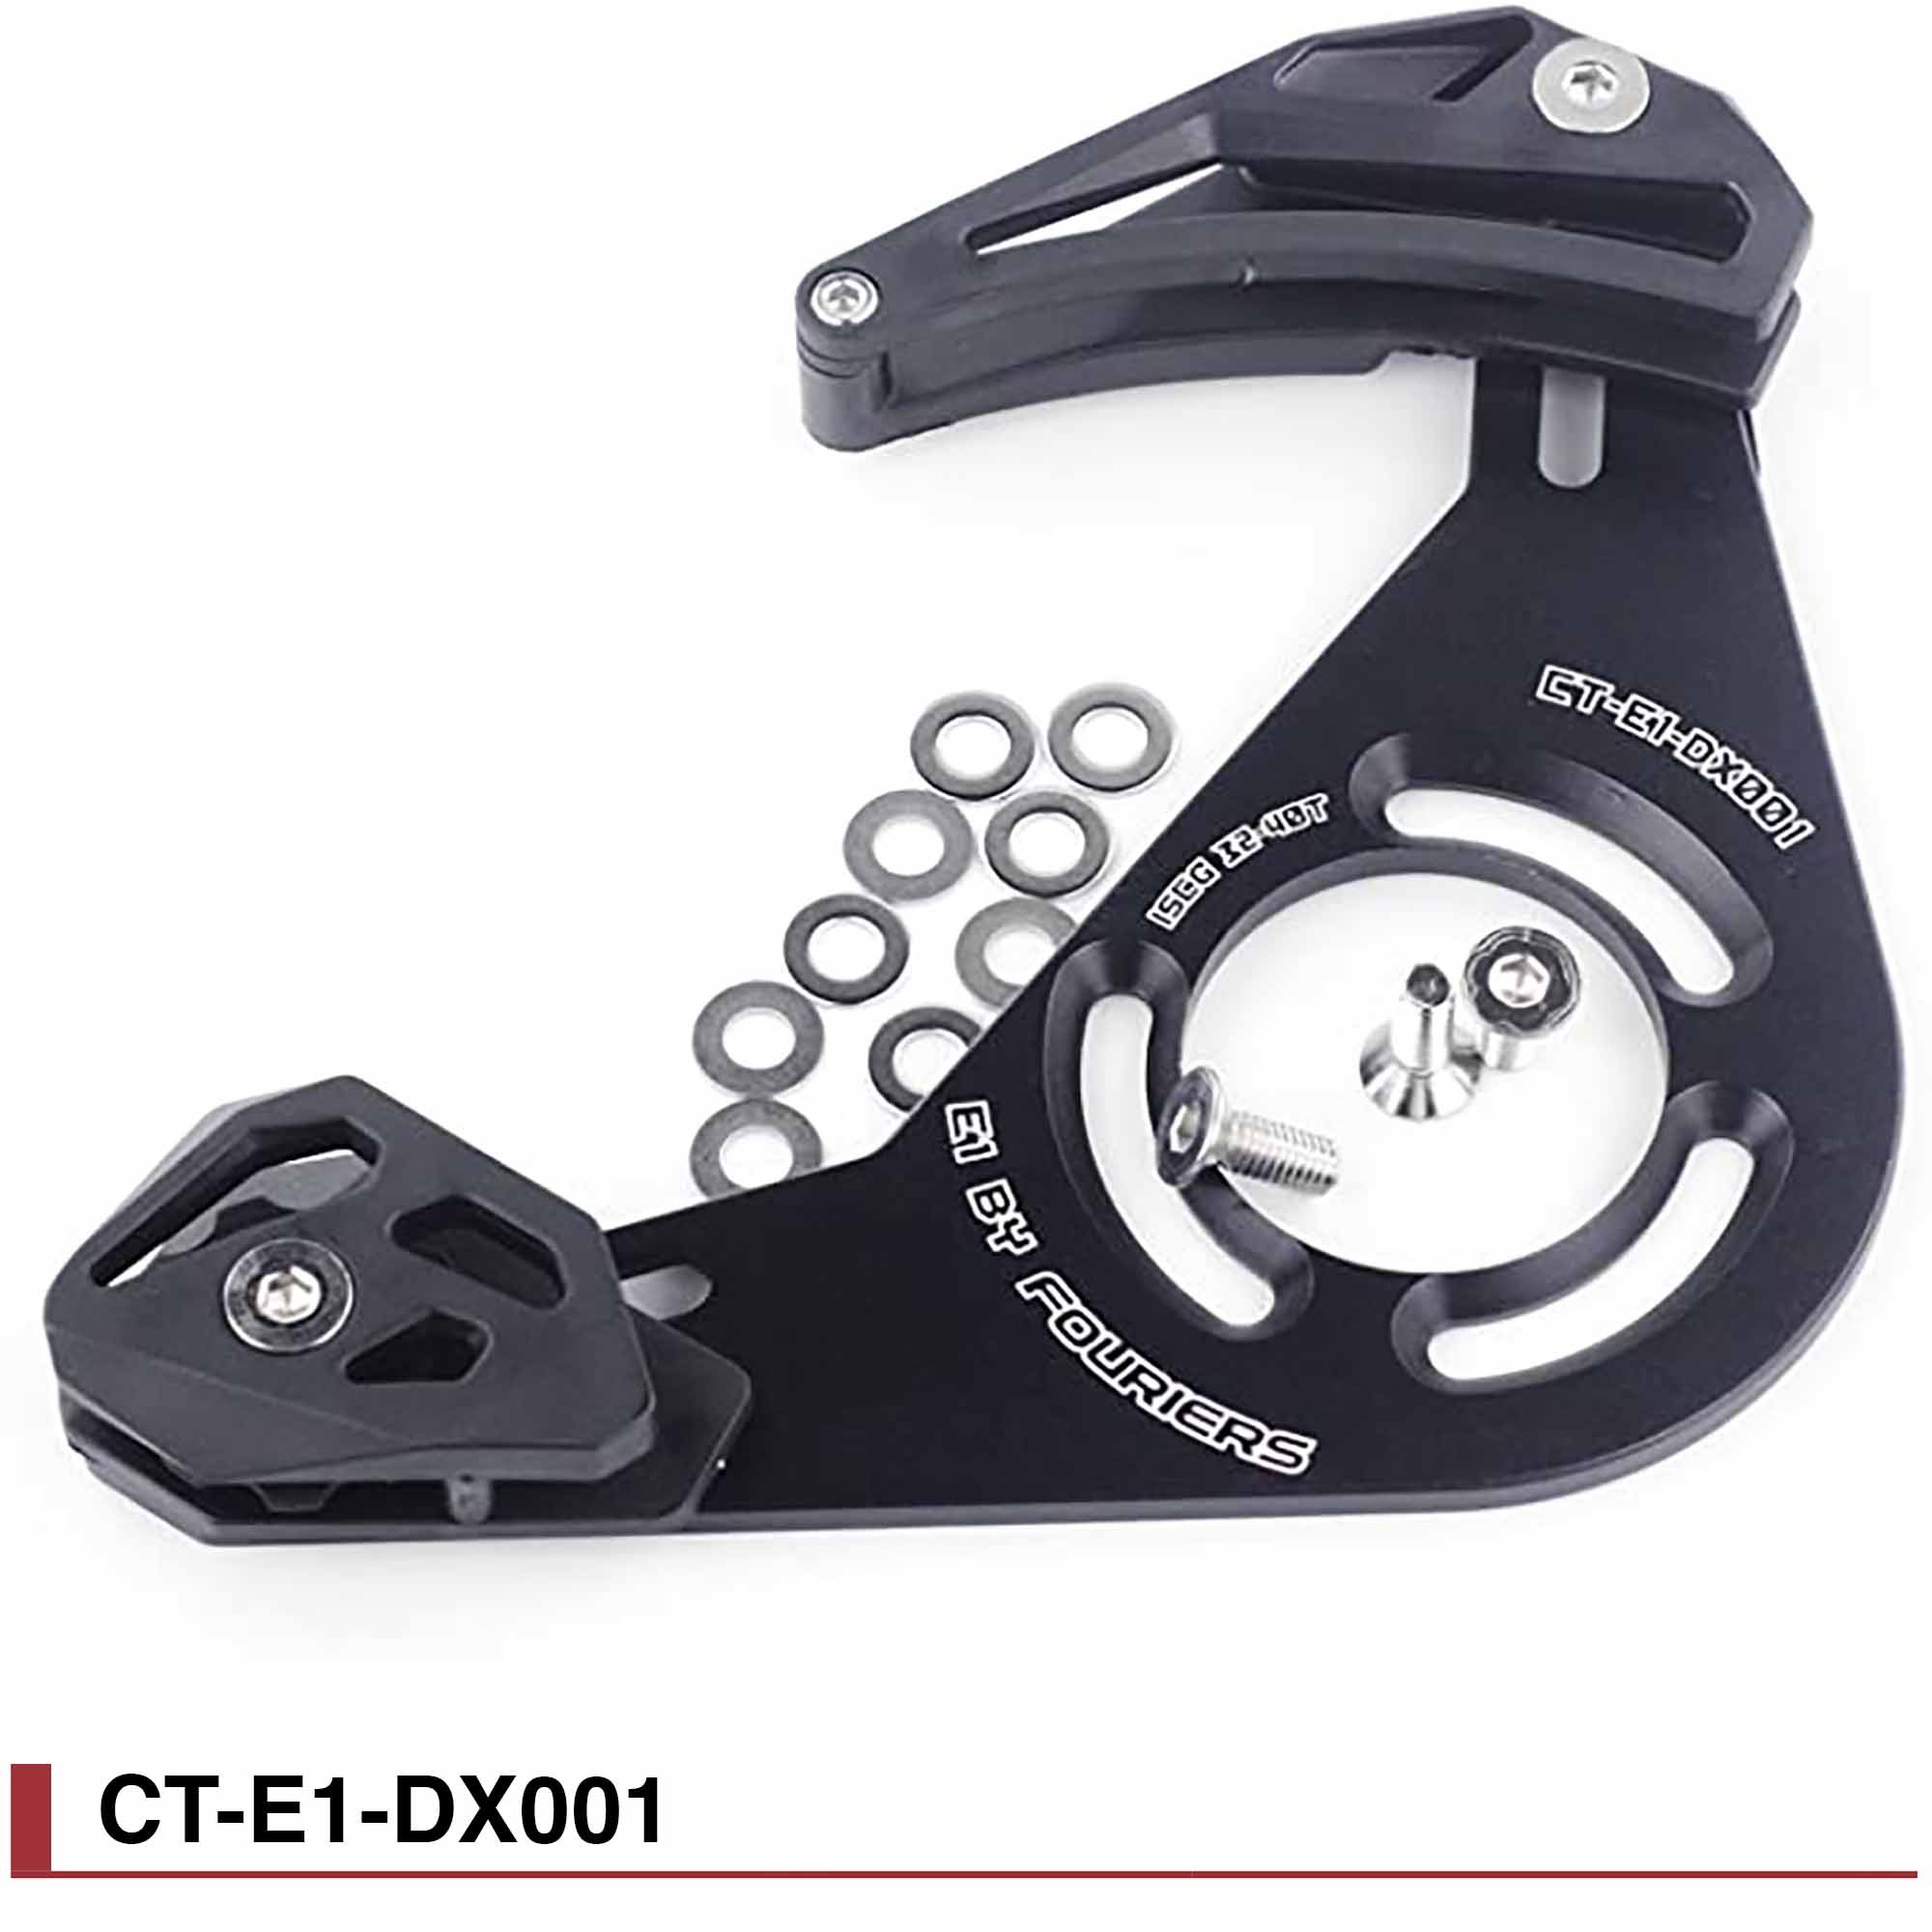 Guide chaine VTT Mono-plateau Fouriers ISCG ou ISCG-05 - SUCYCLES